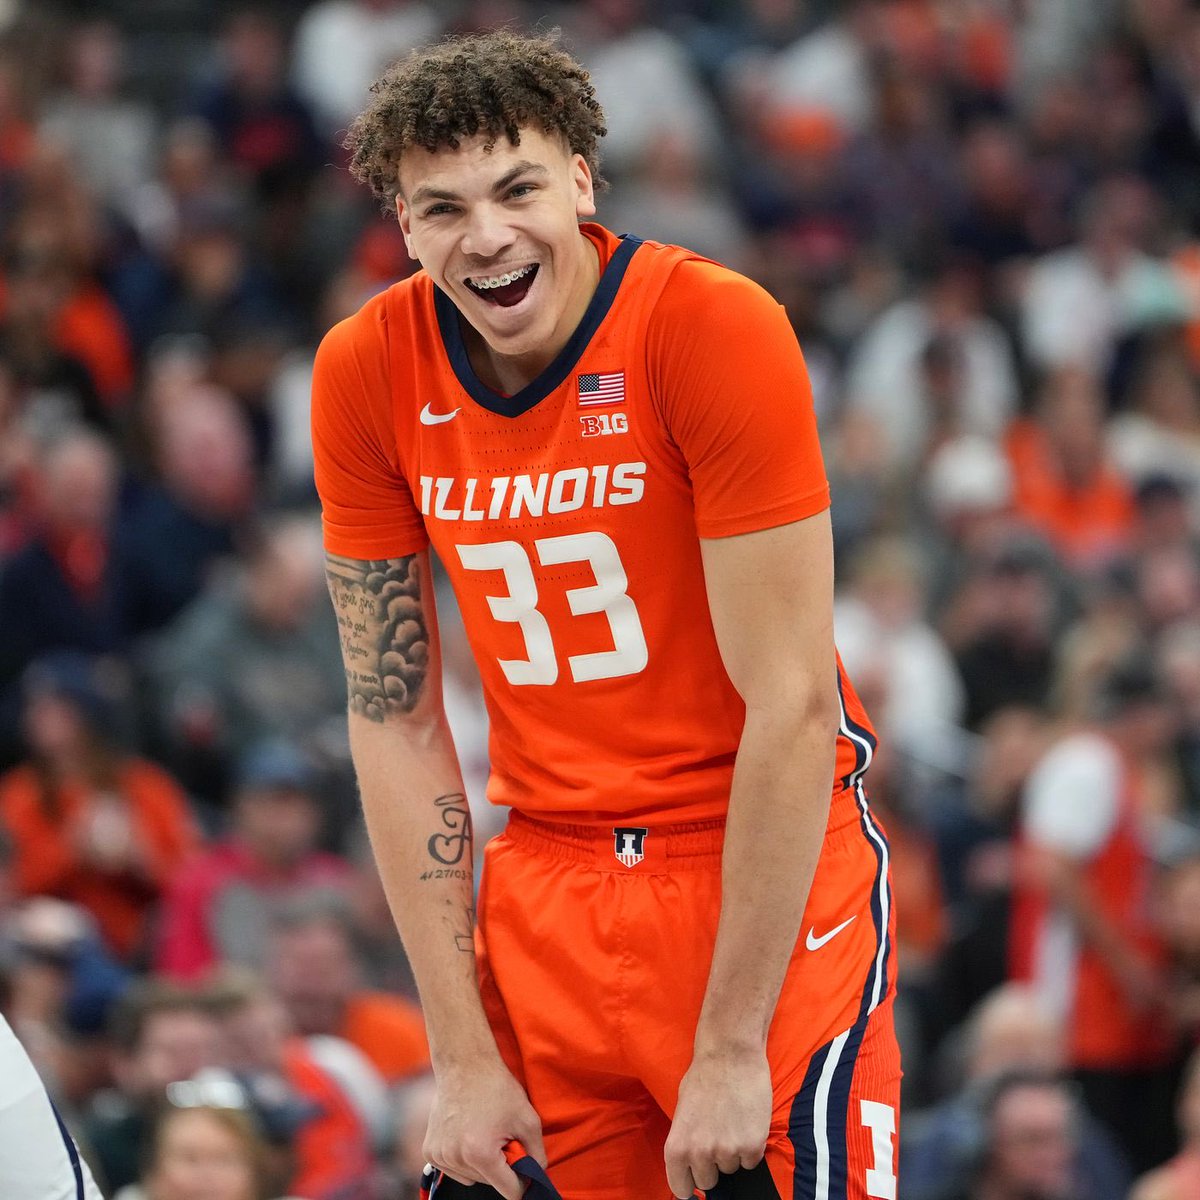 BREAKING: Illinois big man Coleman Hawkins will put his name into the transfer portal before tomorrow’s deadline. Hawkins averaged 12.1 PPG, 6.1 RPG, 2.7 APG, 1.1 BPG, 1.5 SPG and shot 37% from three. Played four years at Illinois.